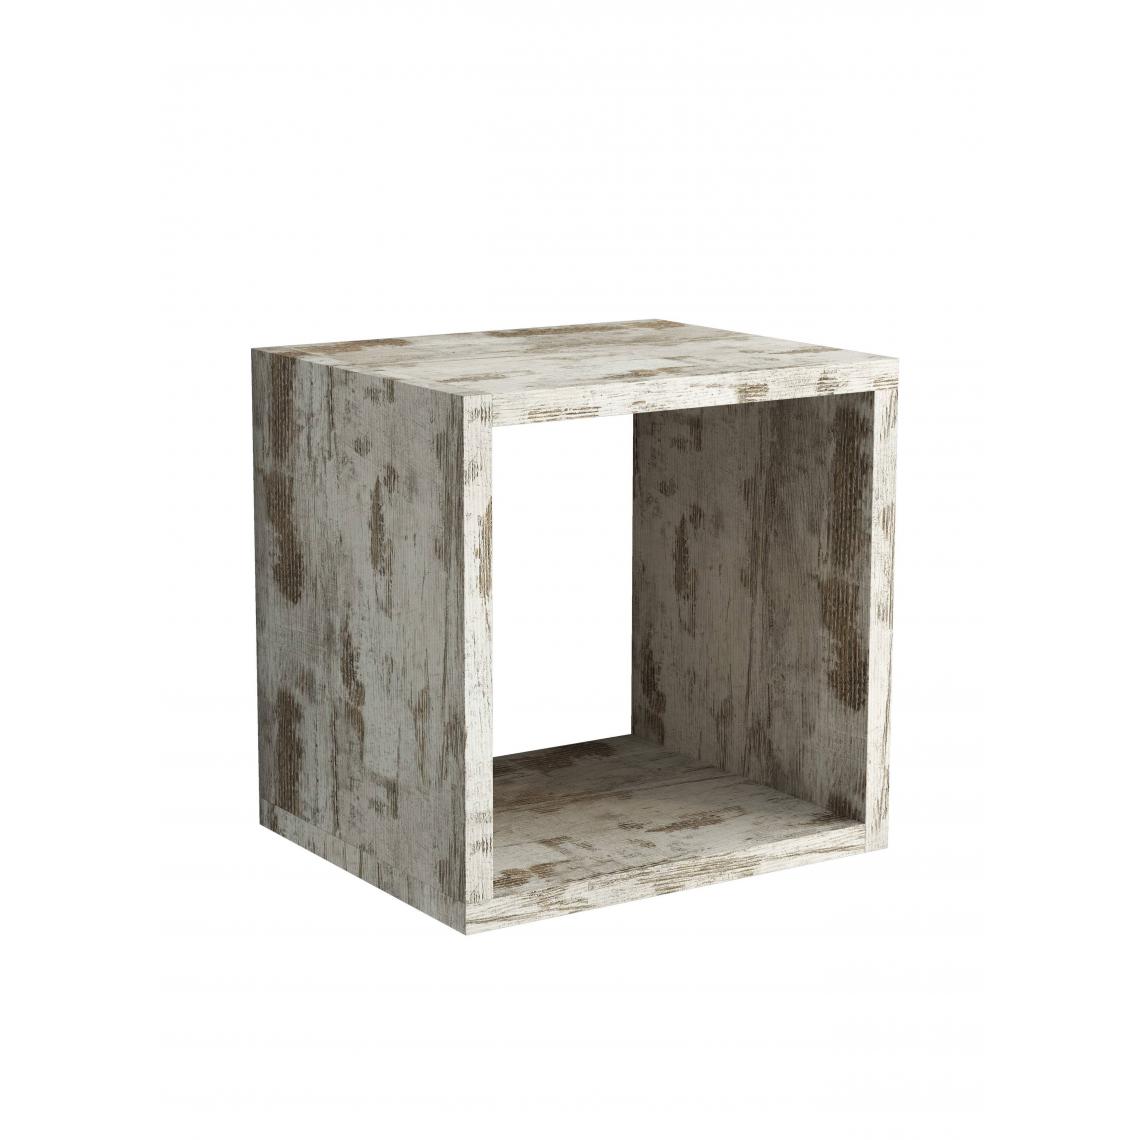 Alter - Cube de rangement modulable, 100% Made in Italy, atagère murale modulable, etagère murale, 30x25h30 cm, Couleur Vintage - Etagères